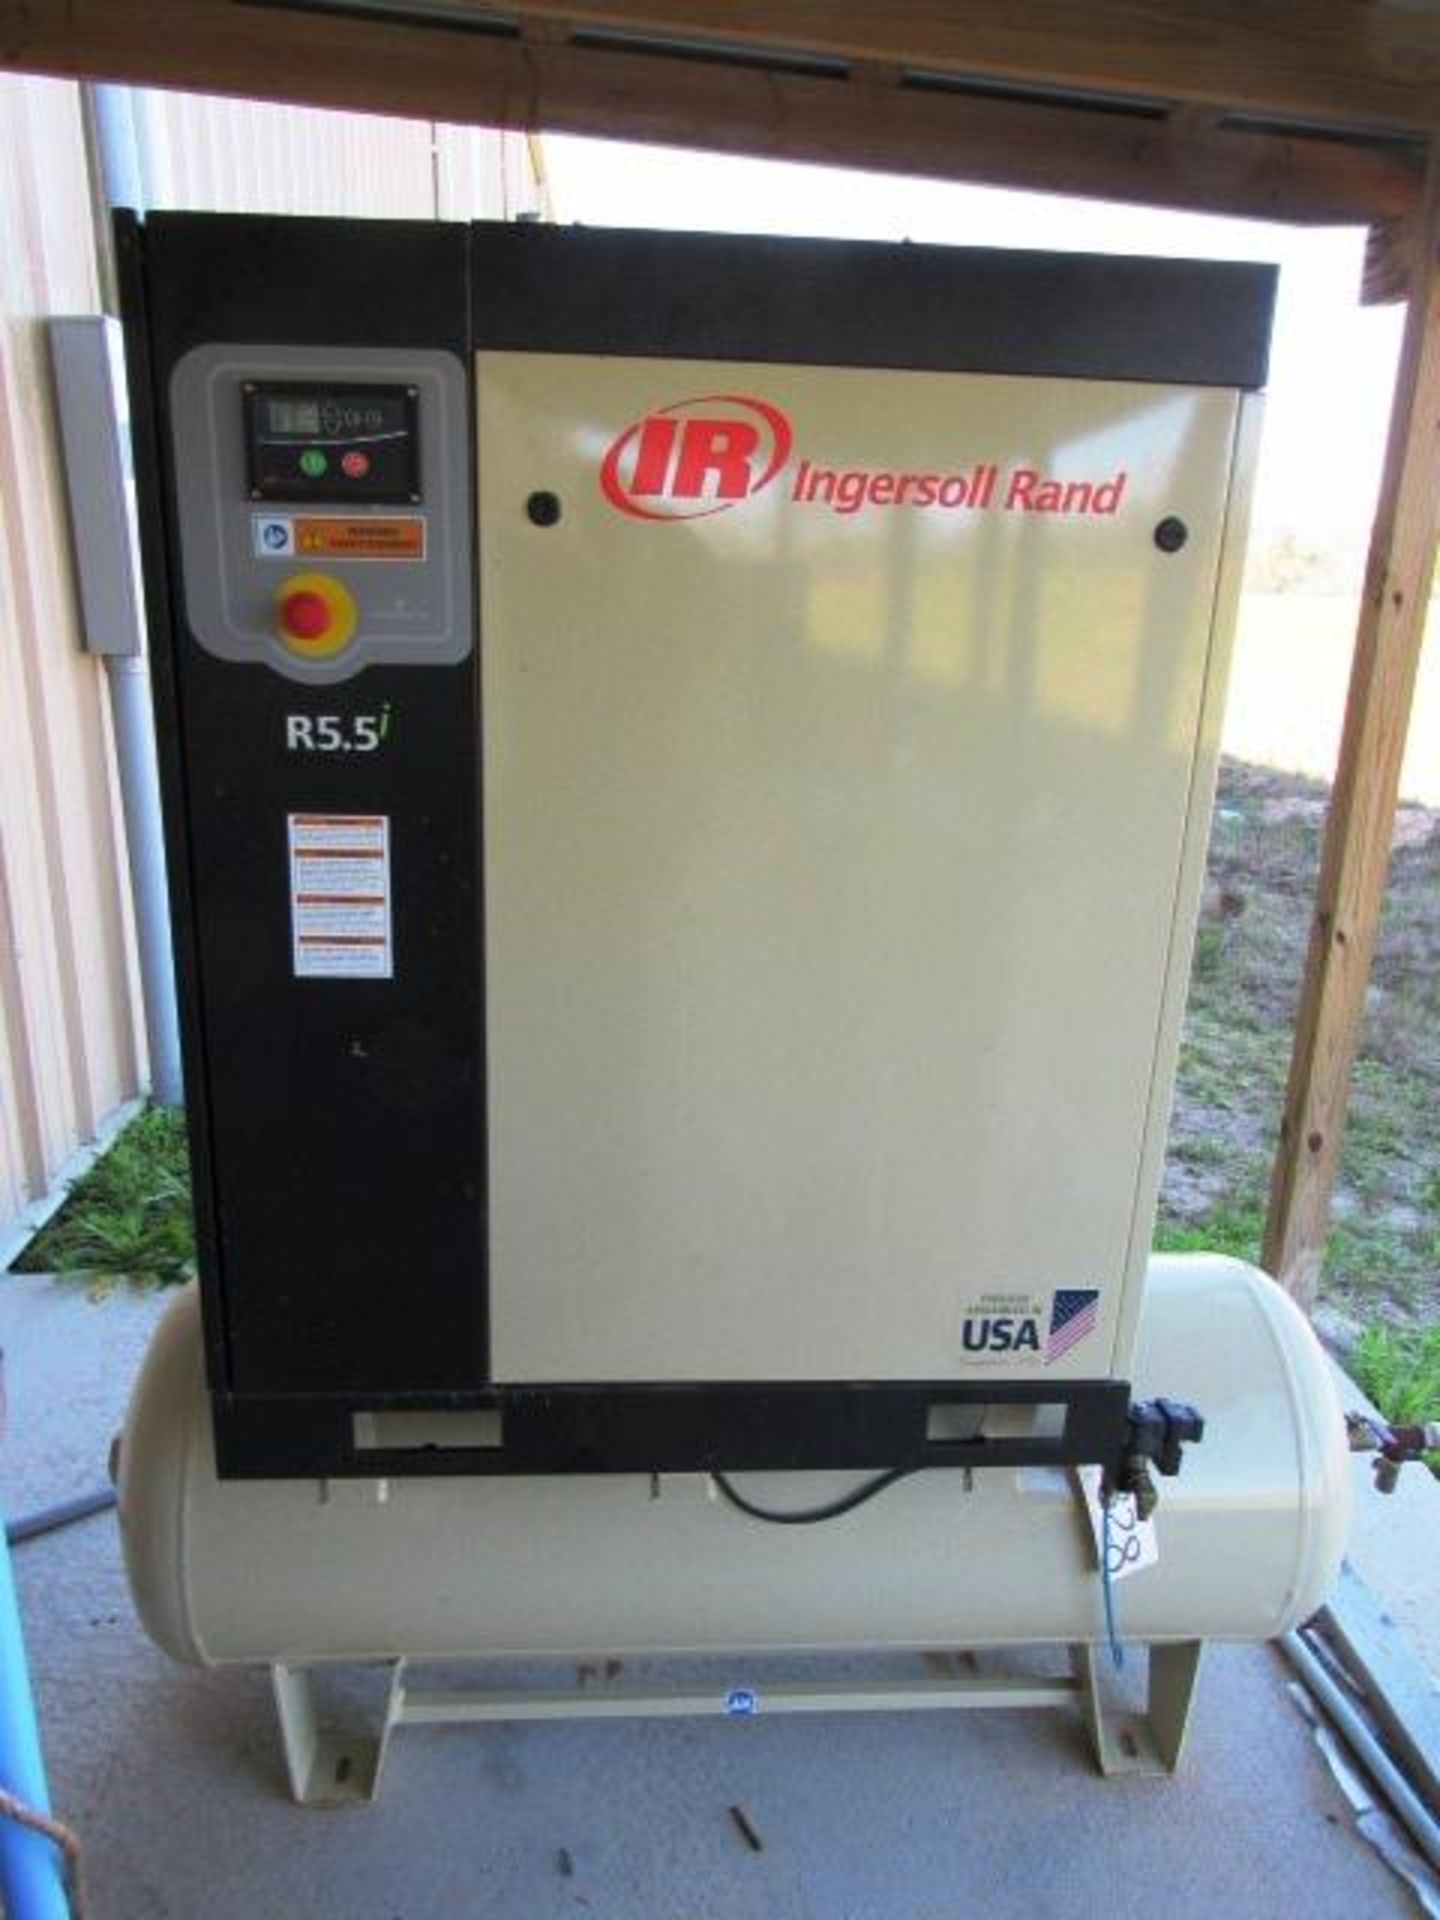 Ingersoll Rand Model R5.5i 7.5HP Rotary Screw Air Compressor stacked with Holding Tank, PLC Control,